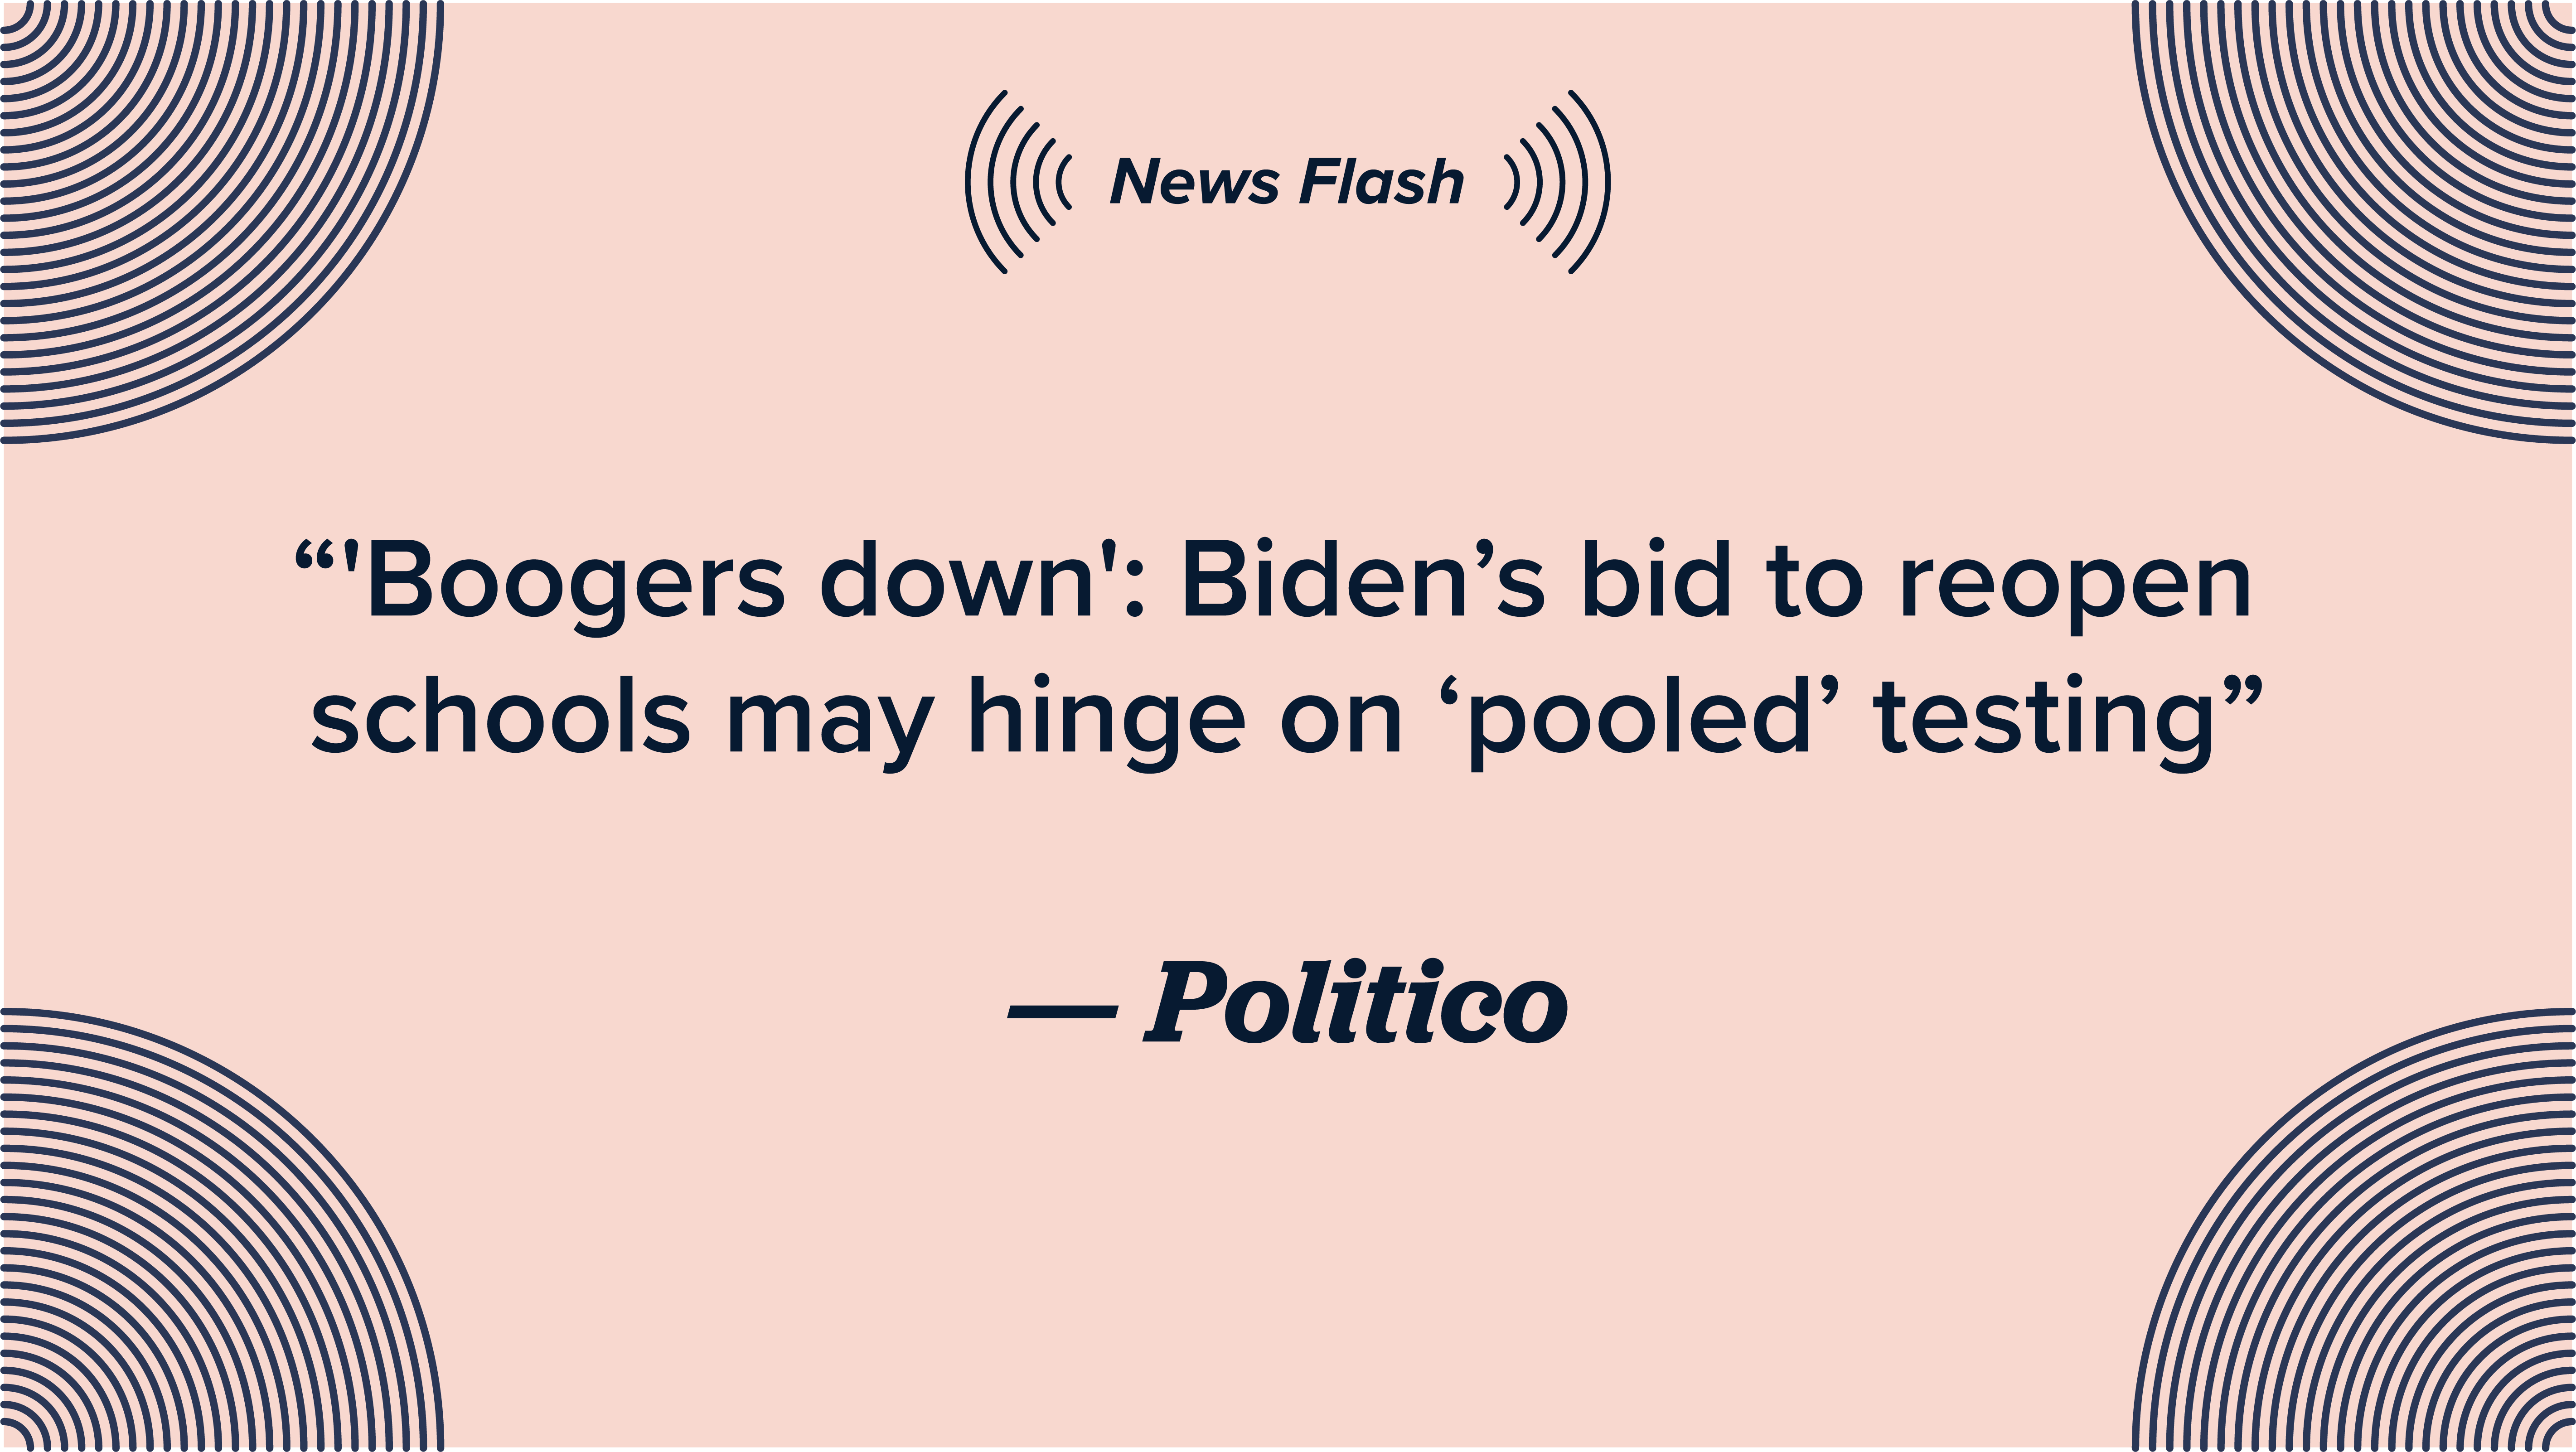 The image depicts the Politico article headline "'Boogers down': Biden’s bid to reopen schools may hinge on ‘pooled’ testing" with the words "new flash" emblazoned above it